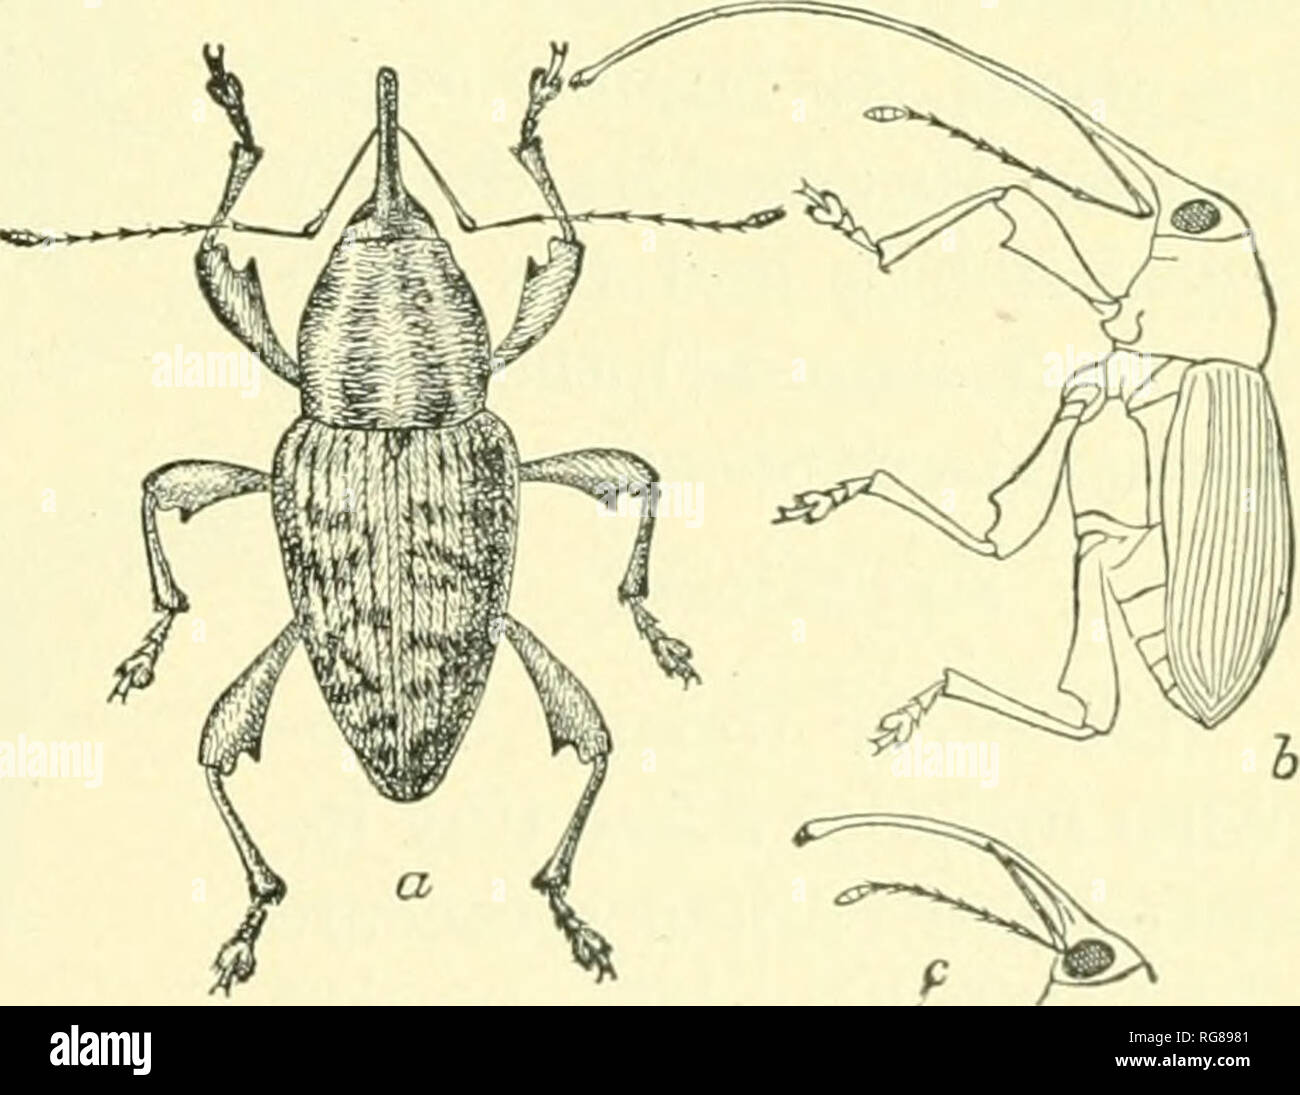 . Bulletin - United States National Museum. Science. a o FlG. 40.—A LONGICORN, PBIONUS FlG. 41.—THE COLORADO POTATO &quot;BUG,&quot; LEPTINOTARSA 10-LIN- laticollis. eata: a, Beetle; b, larva or grub; c, pupa. the bean and pea weevils (Bruchidae) (fig. 125) belong to this section. Rhynchophora, or weevils. This section comprises an enormous number of compact beetles, readily known by the snout or beaklike head, called a rostrum. The tarsi are four-jointed. The mouth- parts are very small and at the tip of the beak, and the antennae are often slightly clavate and geniculate or bowed. The elytra Stock Photo